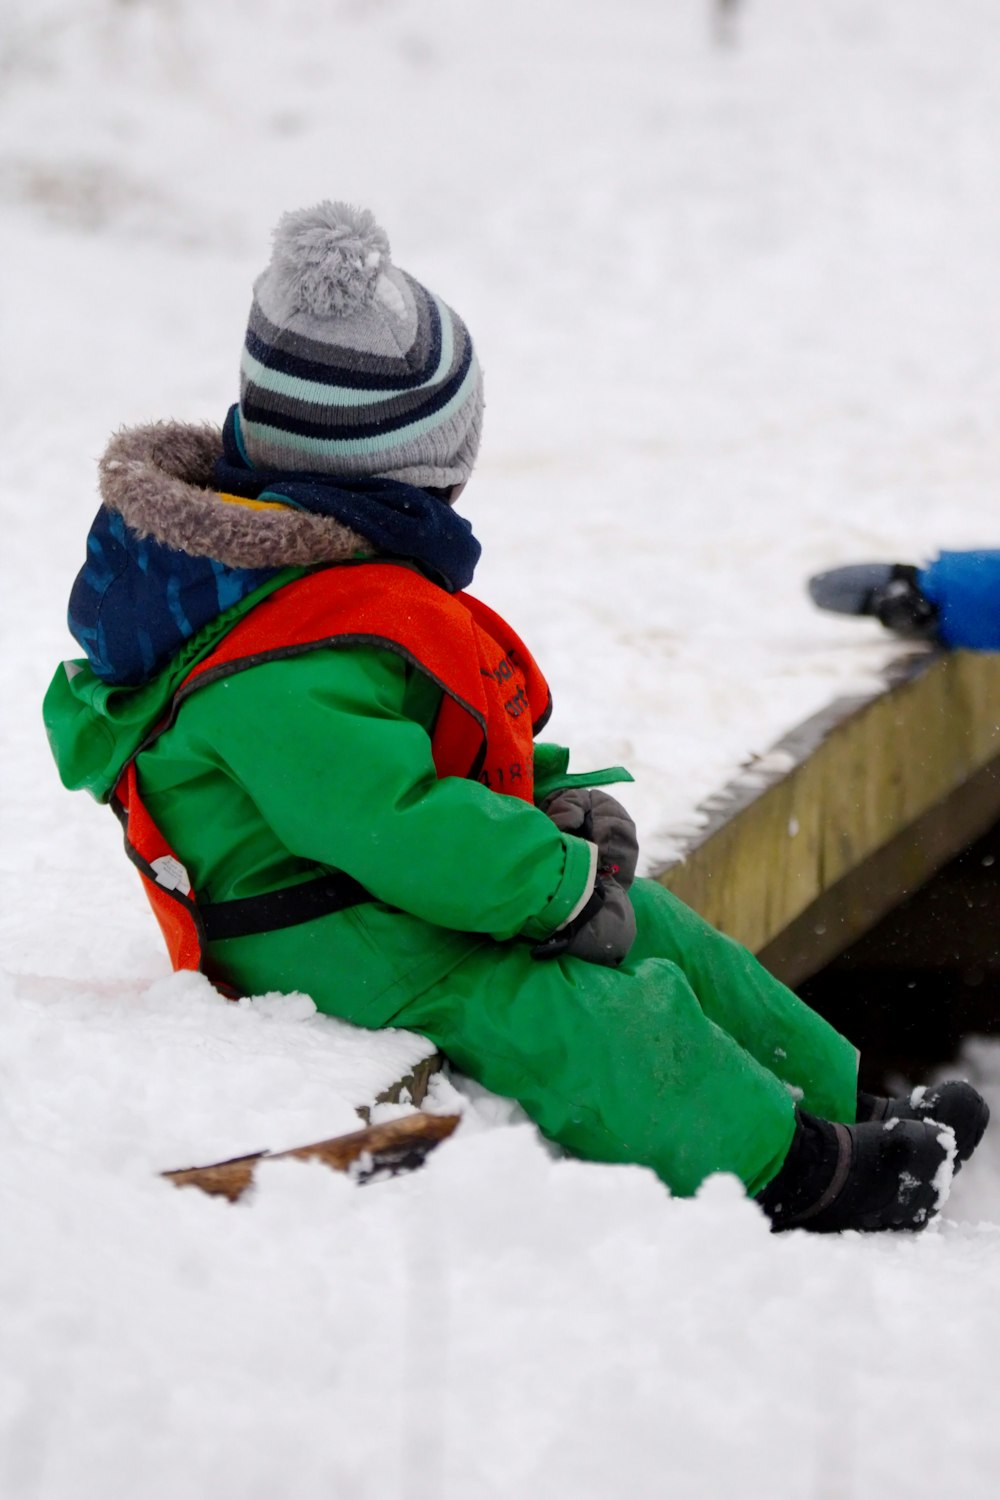 a small child sitting in the snow next to a sled